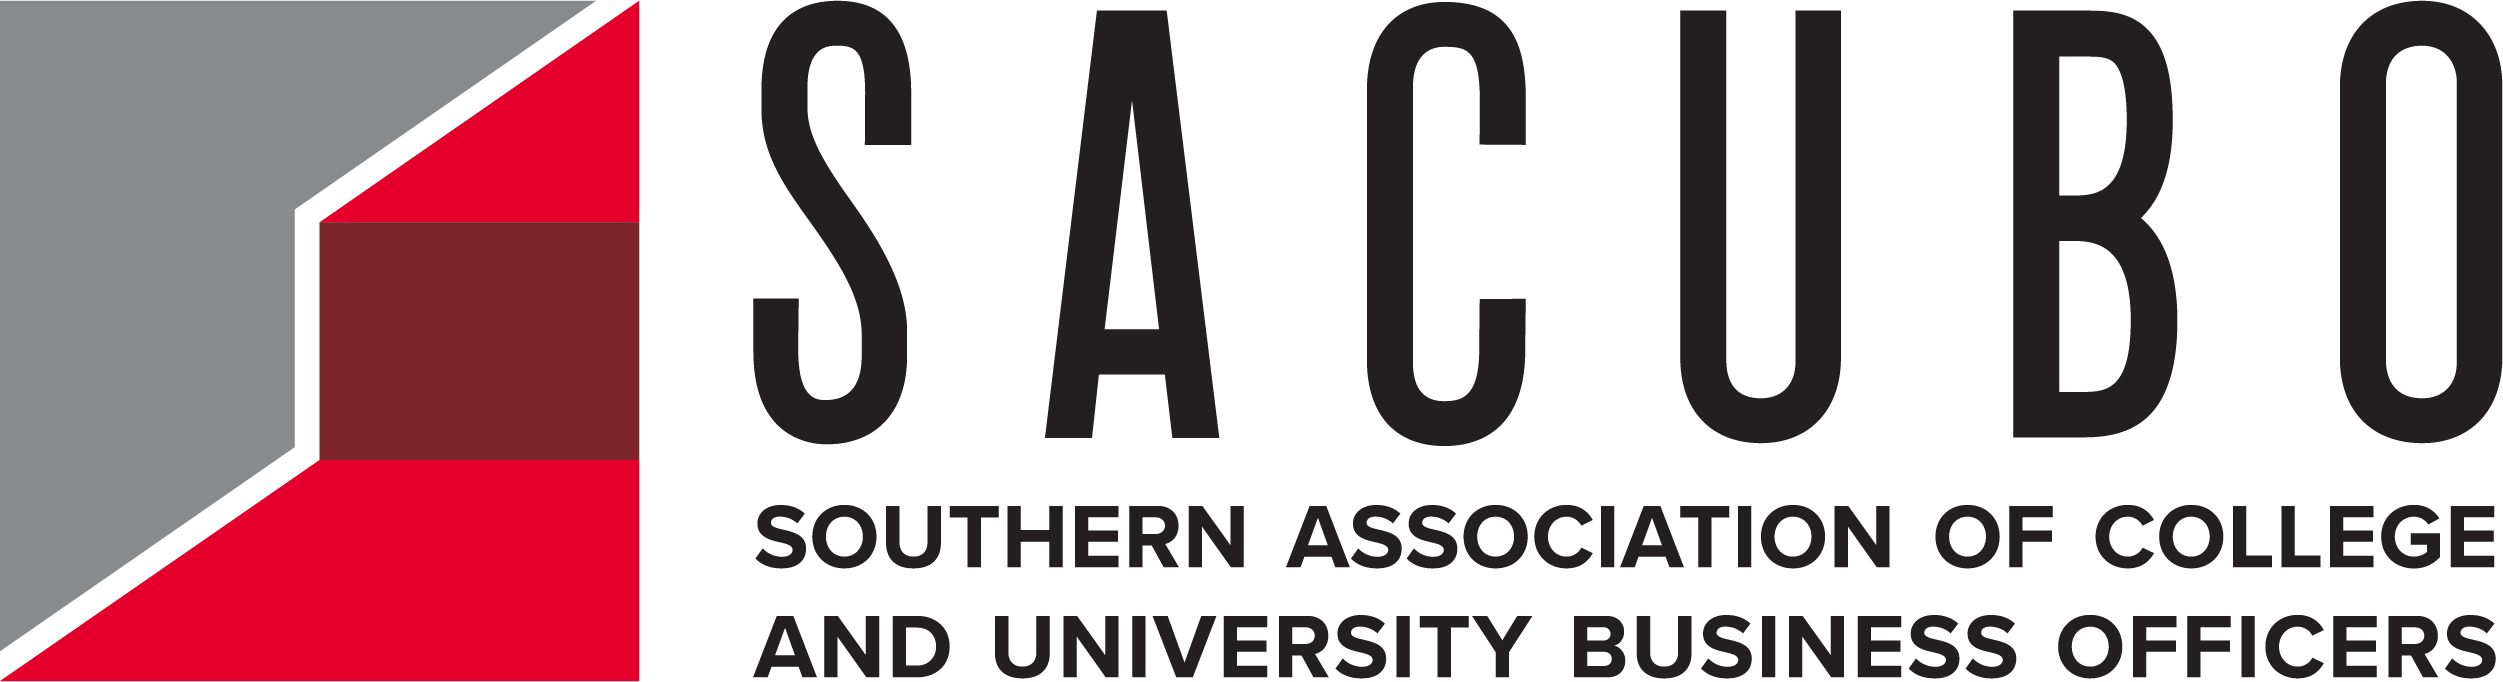 Southern Association of College and University Business Officers logo.